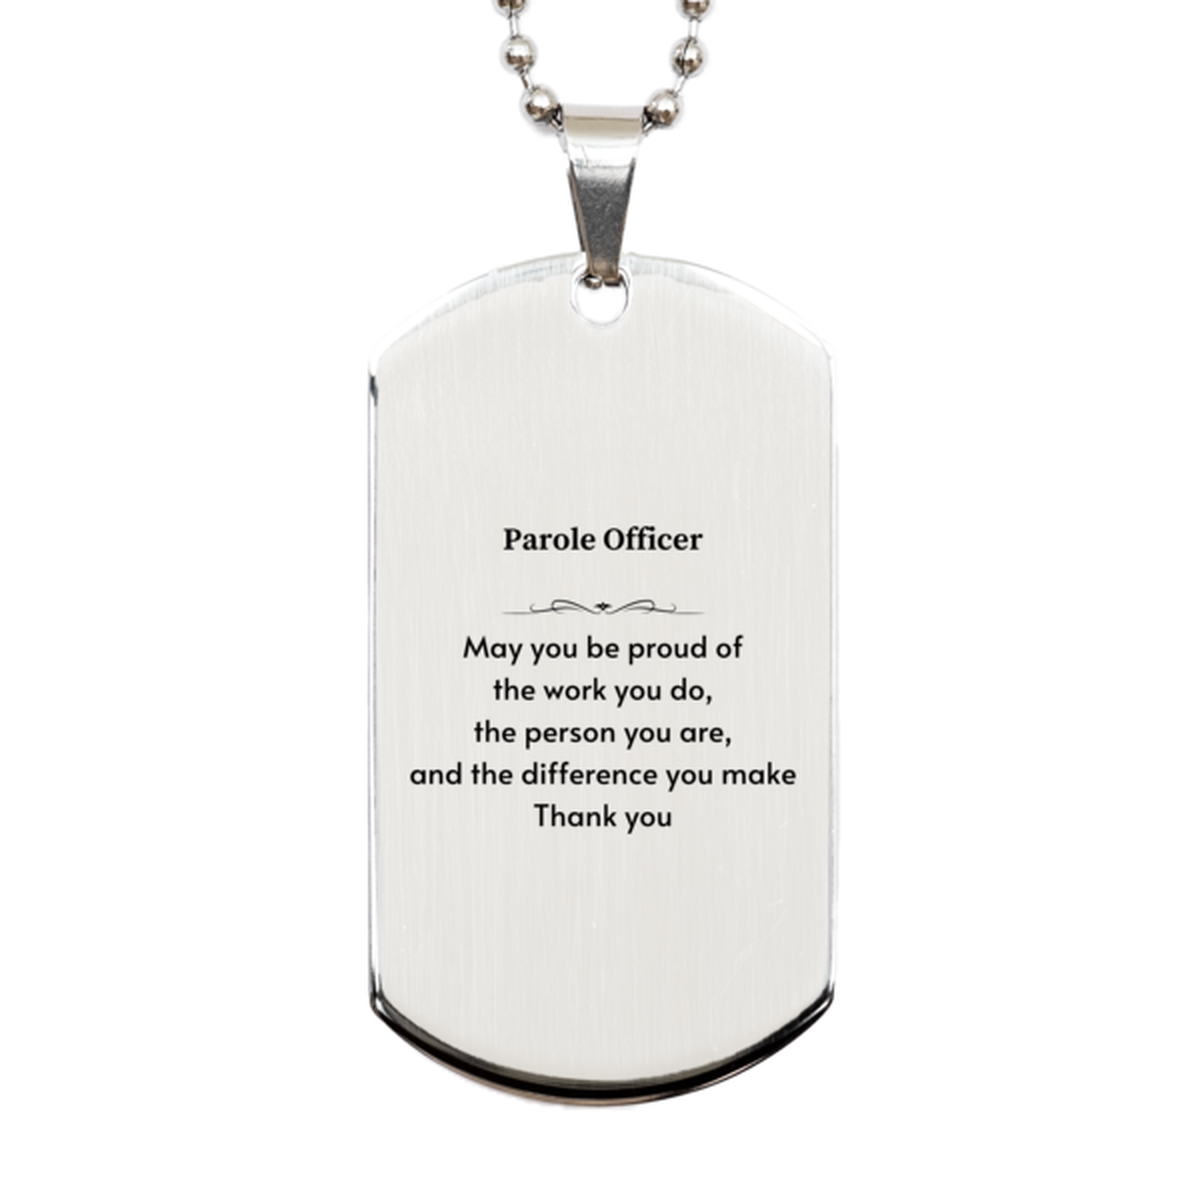 Heartwarming Silver Dog Tag Retirement Coworkers Gifts for Parole Officer, Parole Officer May You be proud of the work you do, the person you are Gifts for Boss Men Women Friends